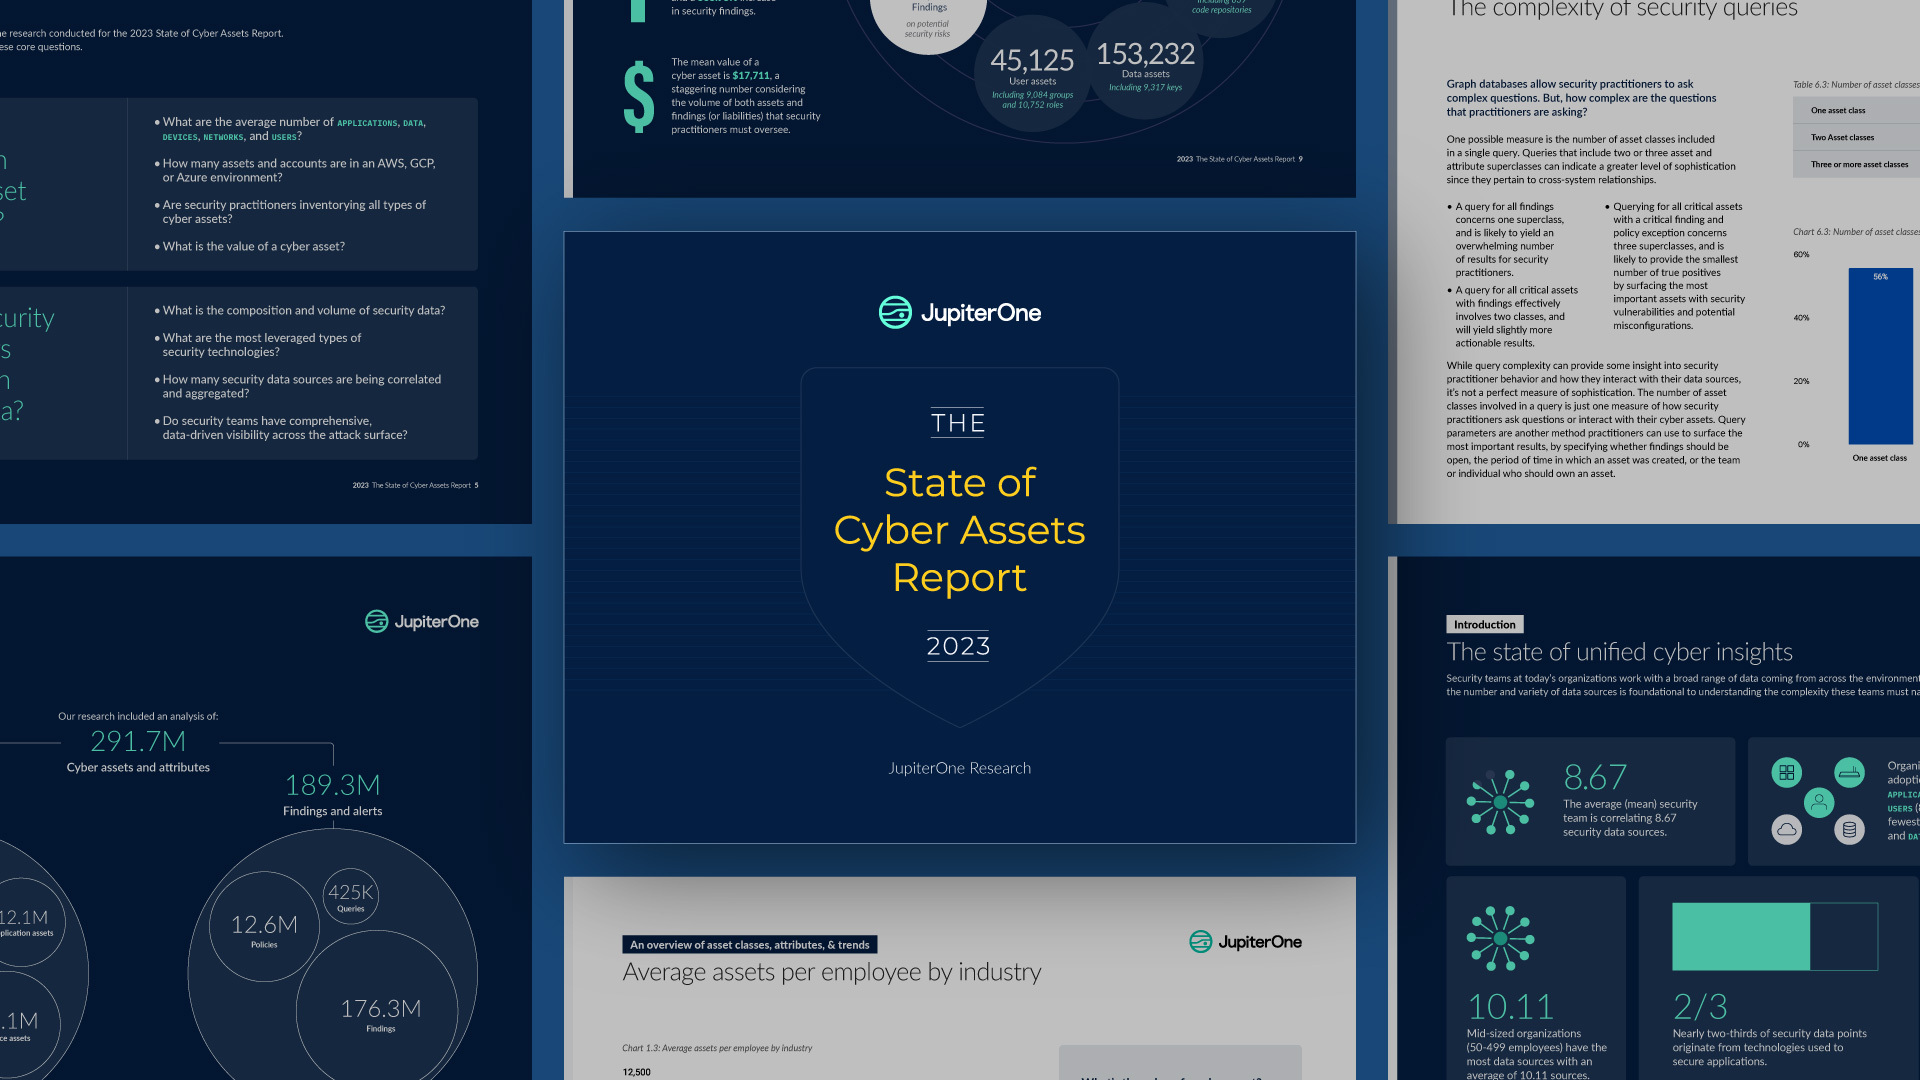 jupiterone_second-annual-state-of-cyber-assets-report-reveals-growth-in-cyber-asset-value-scale